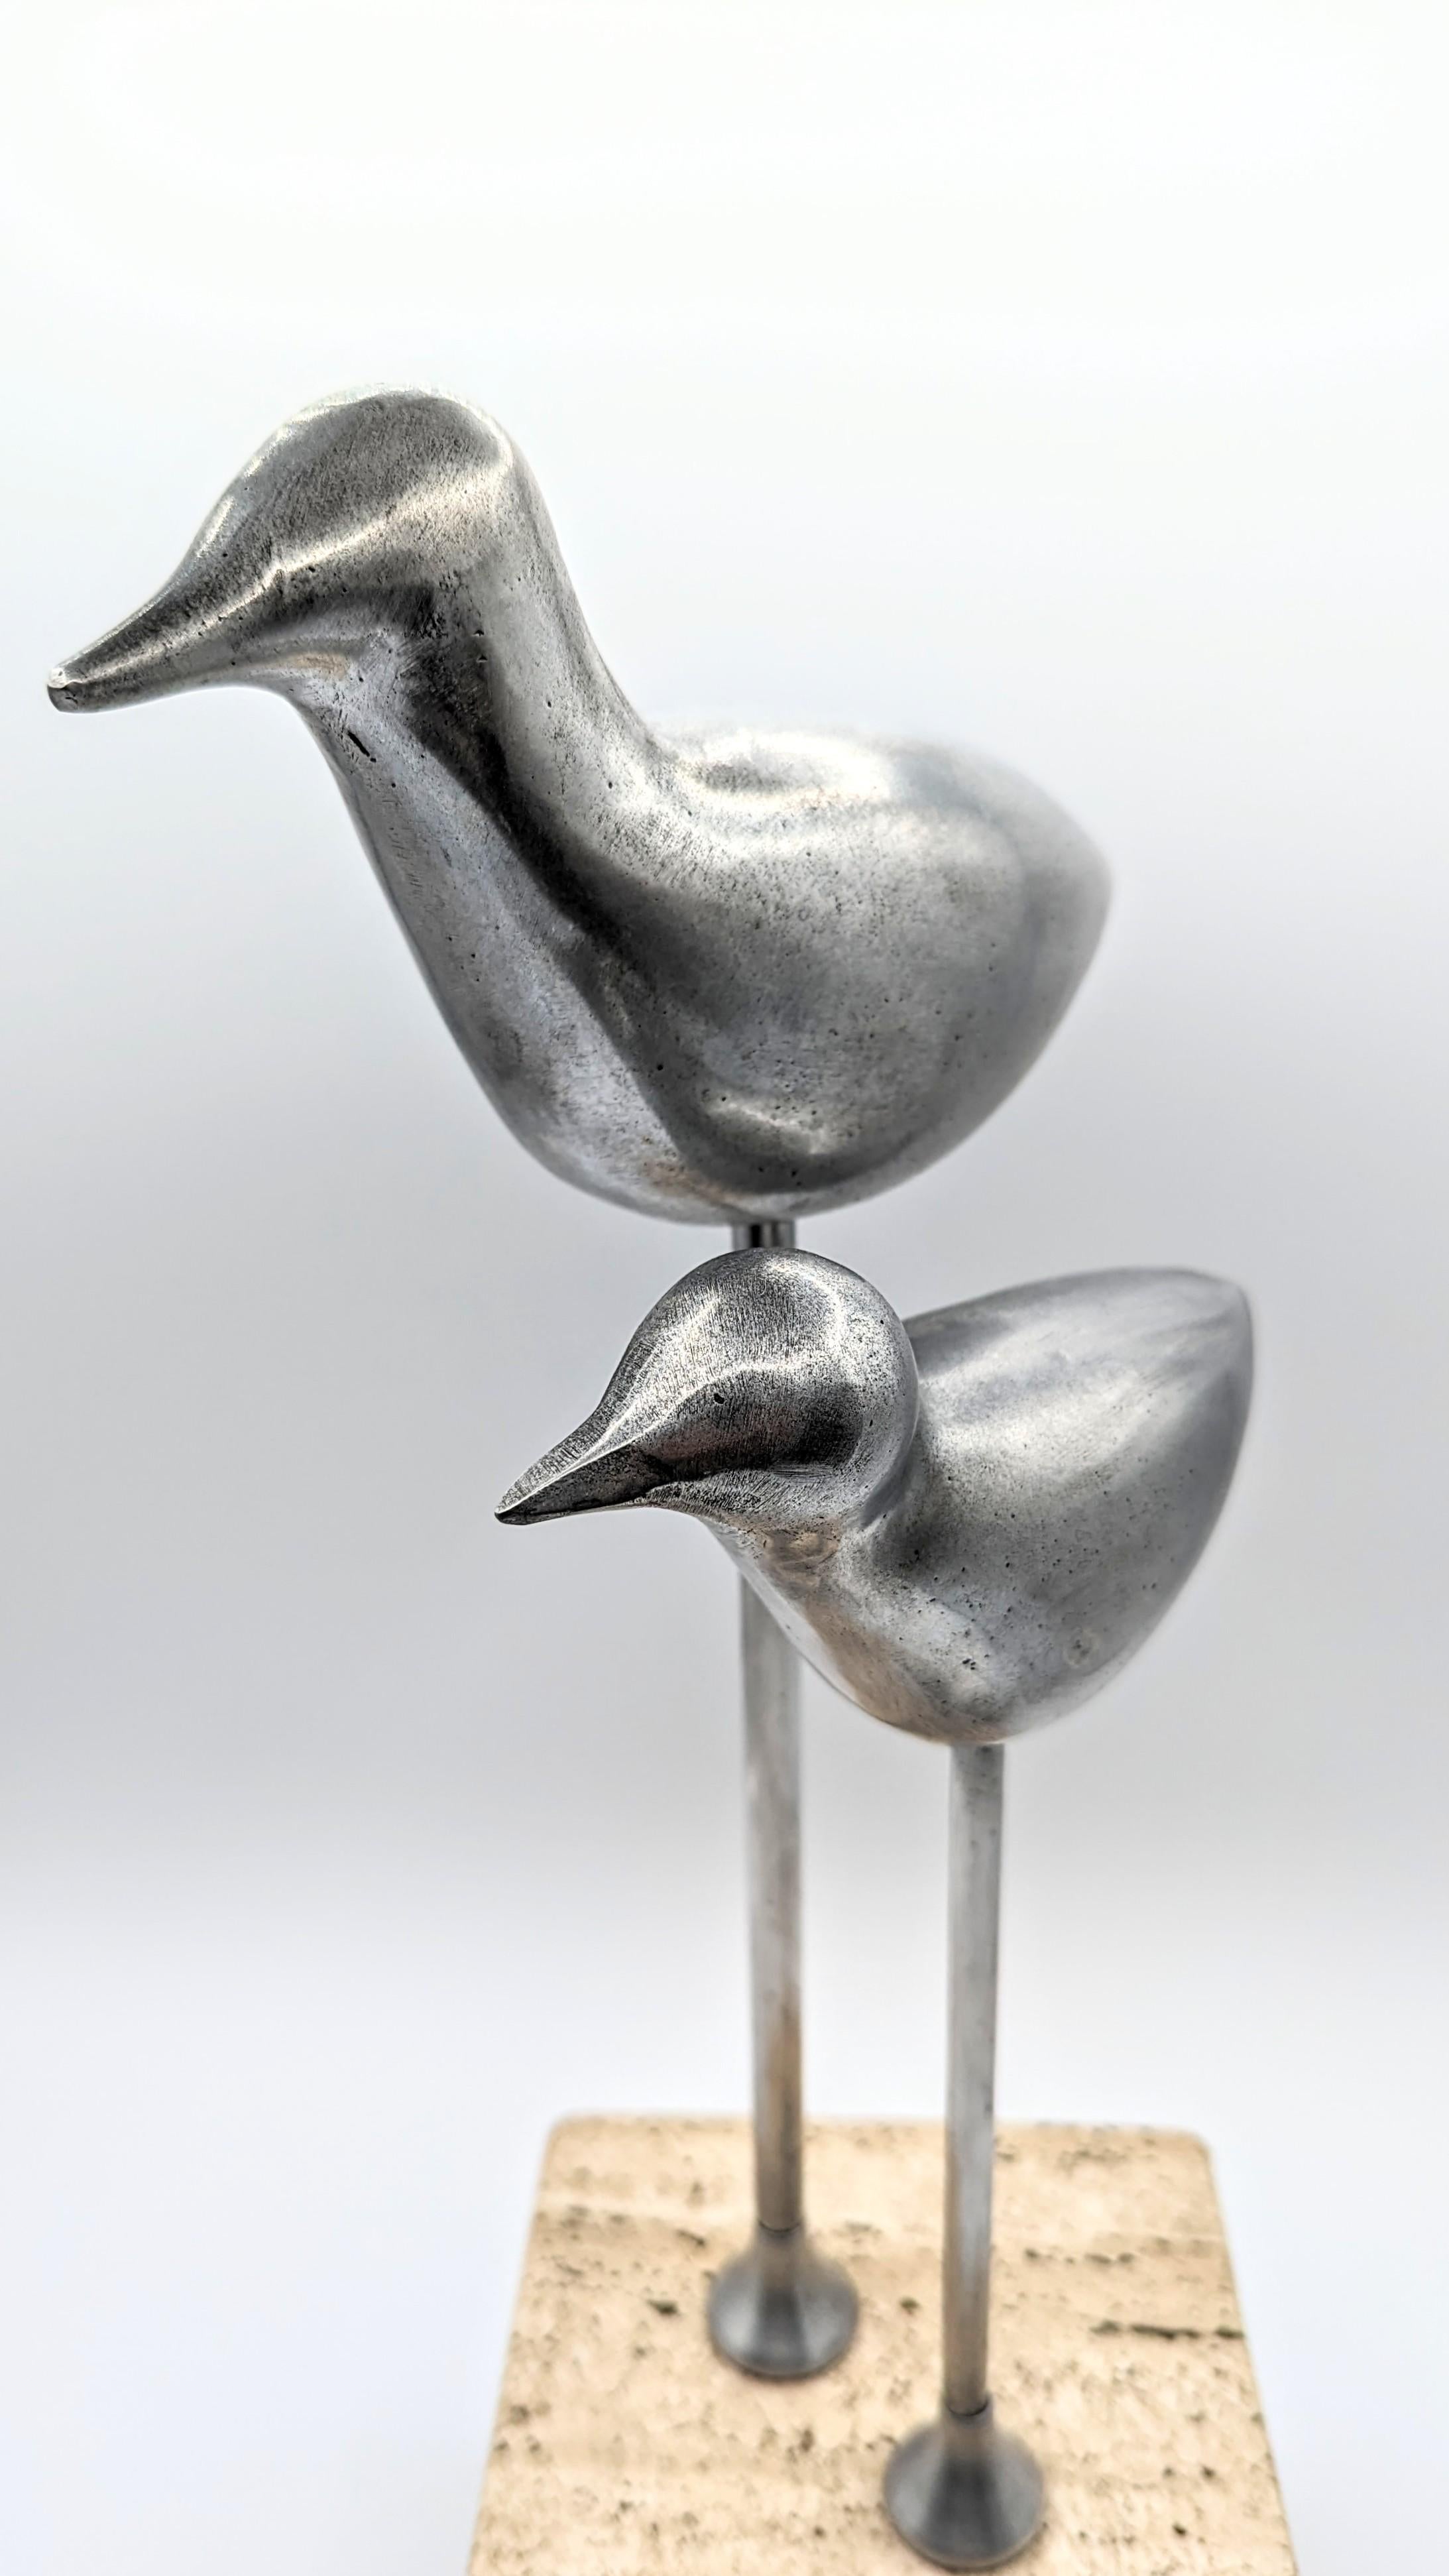 Rare and beautiful birds sculpture in aluminum on travertin and wood base, manufactured in France in 1970s. Very decorative object and very good manufacture.